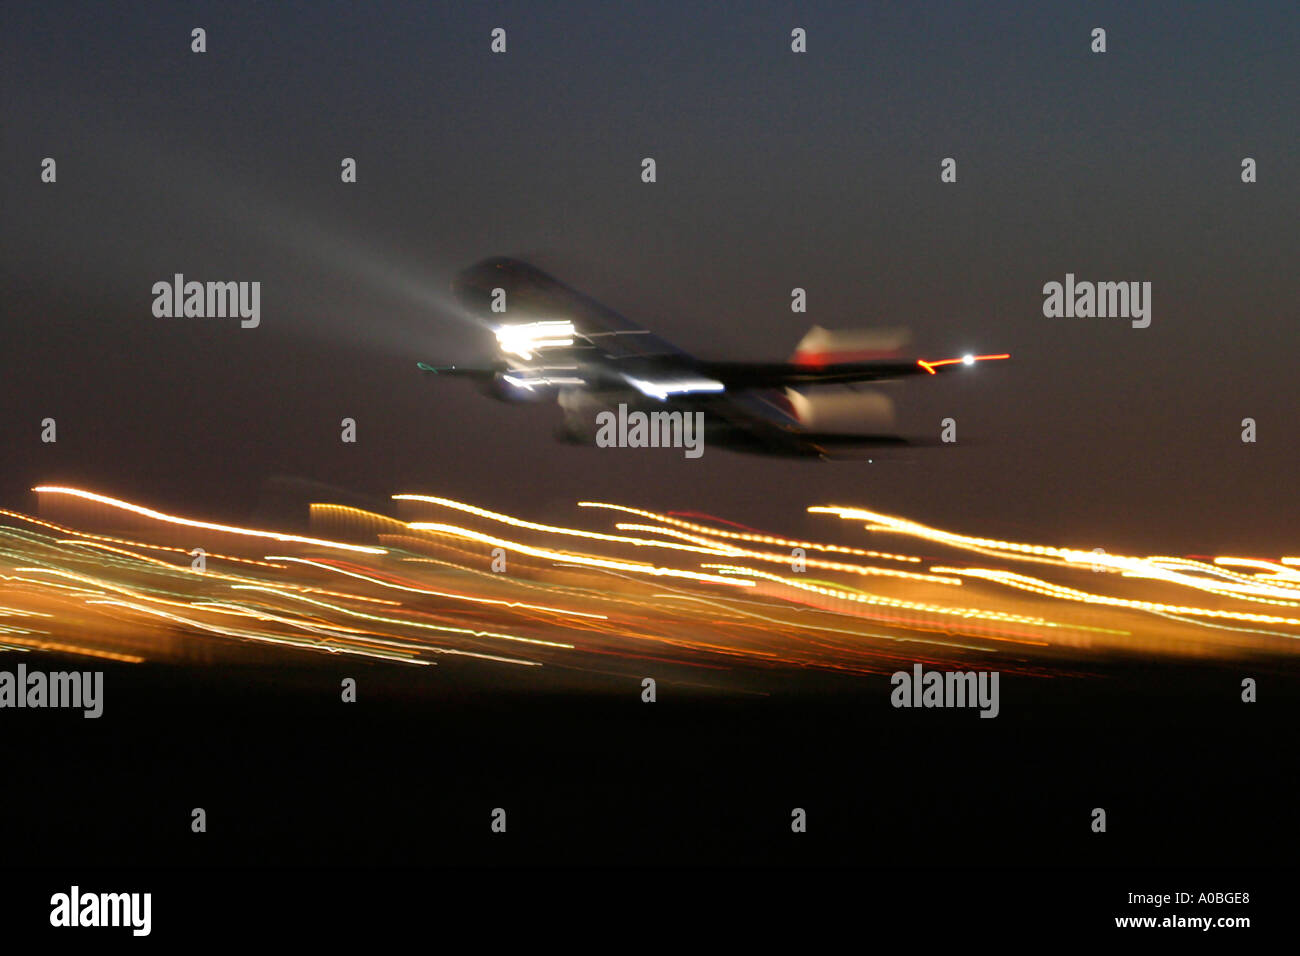 Airliner taking off at night Stock Photo